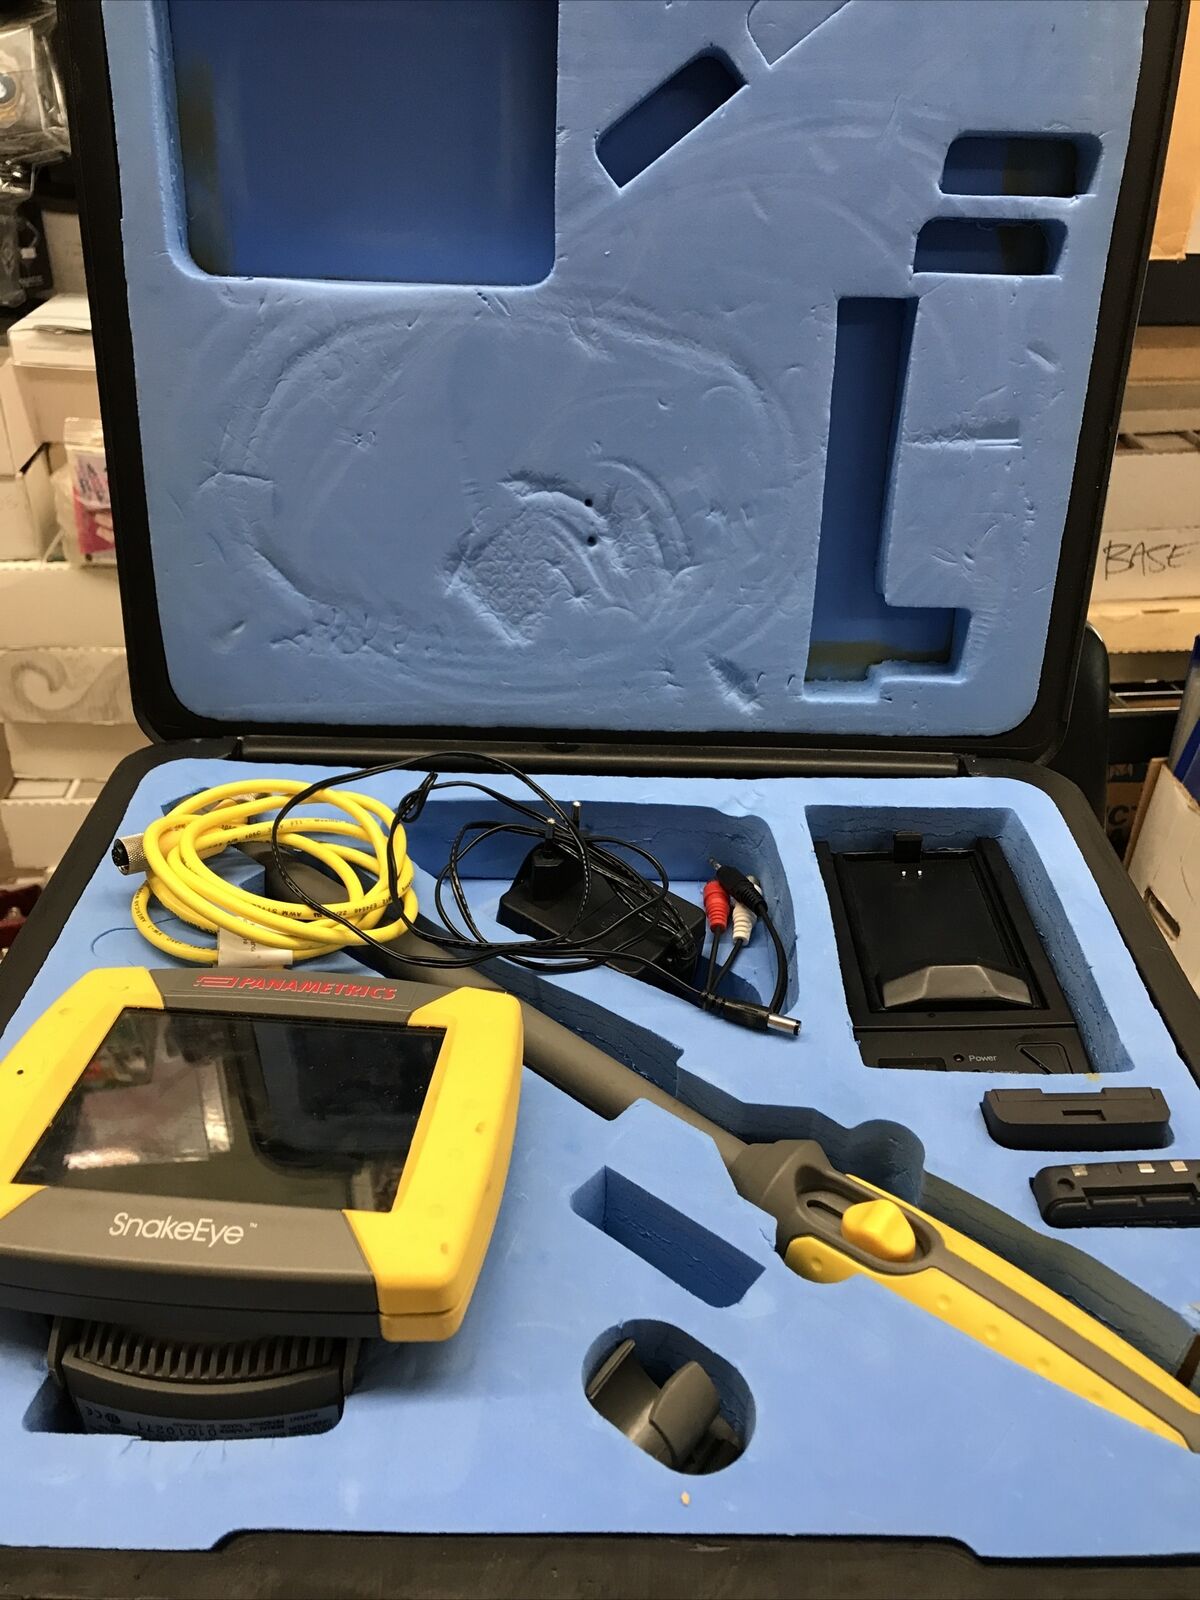 Panametrics Snake Eye Diagnostic Tool For Tight Spaces Not Complete